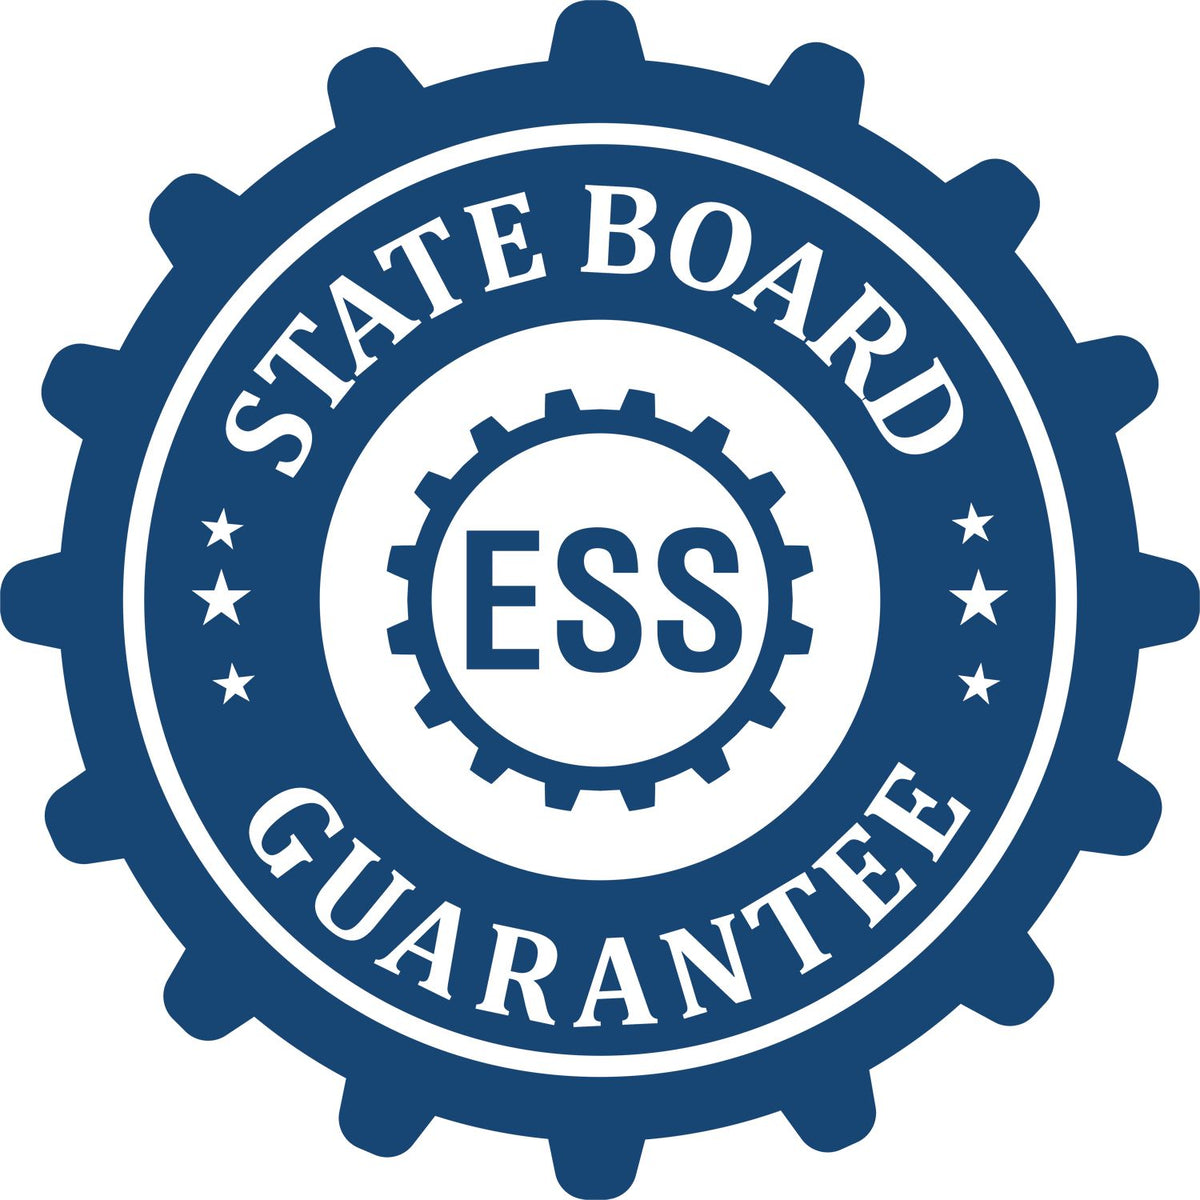 An emblem in a gear shape illustrating a state board guarantee for the Hybrid Indiana Land Surveyor Seal